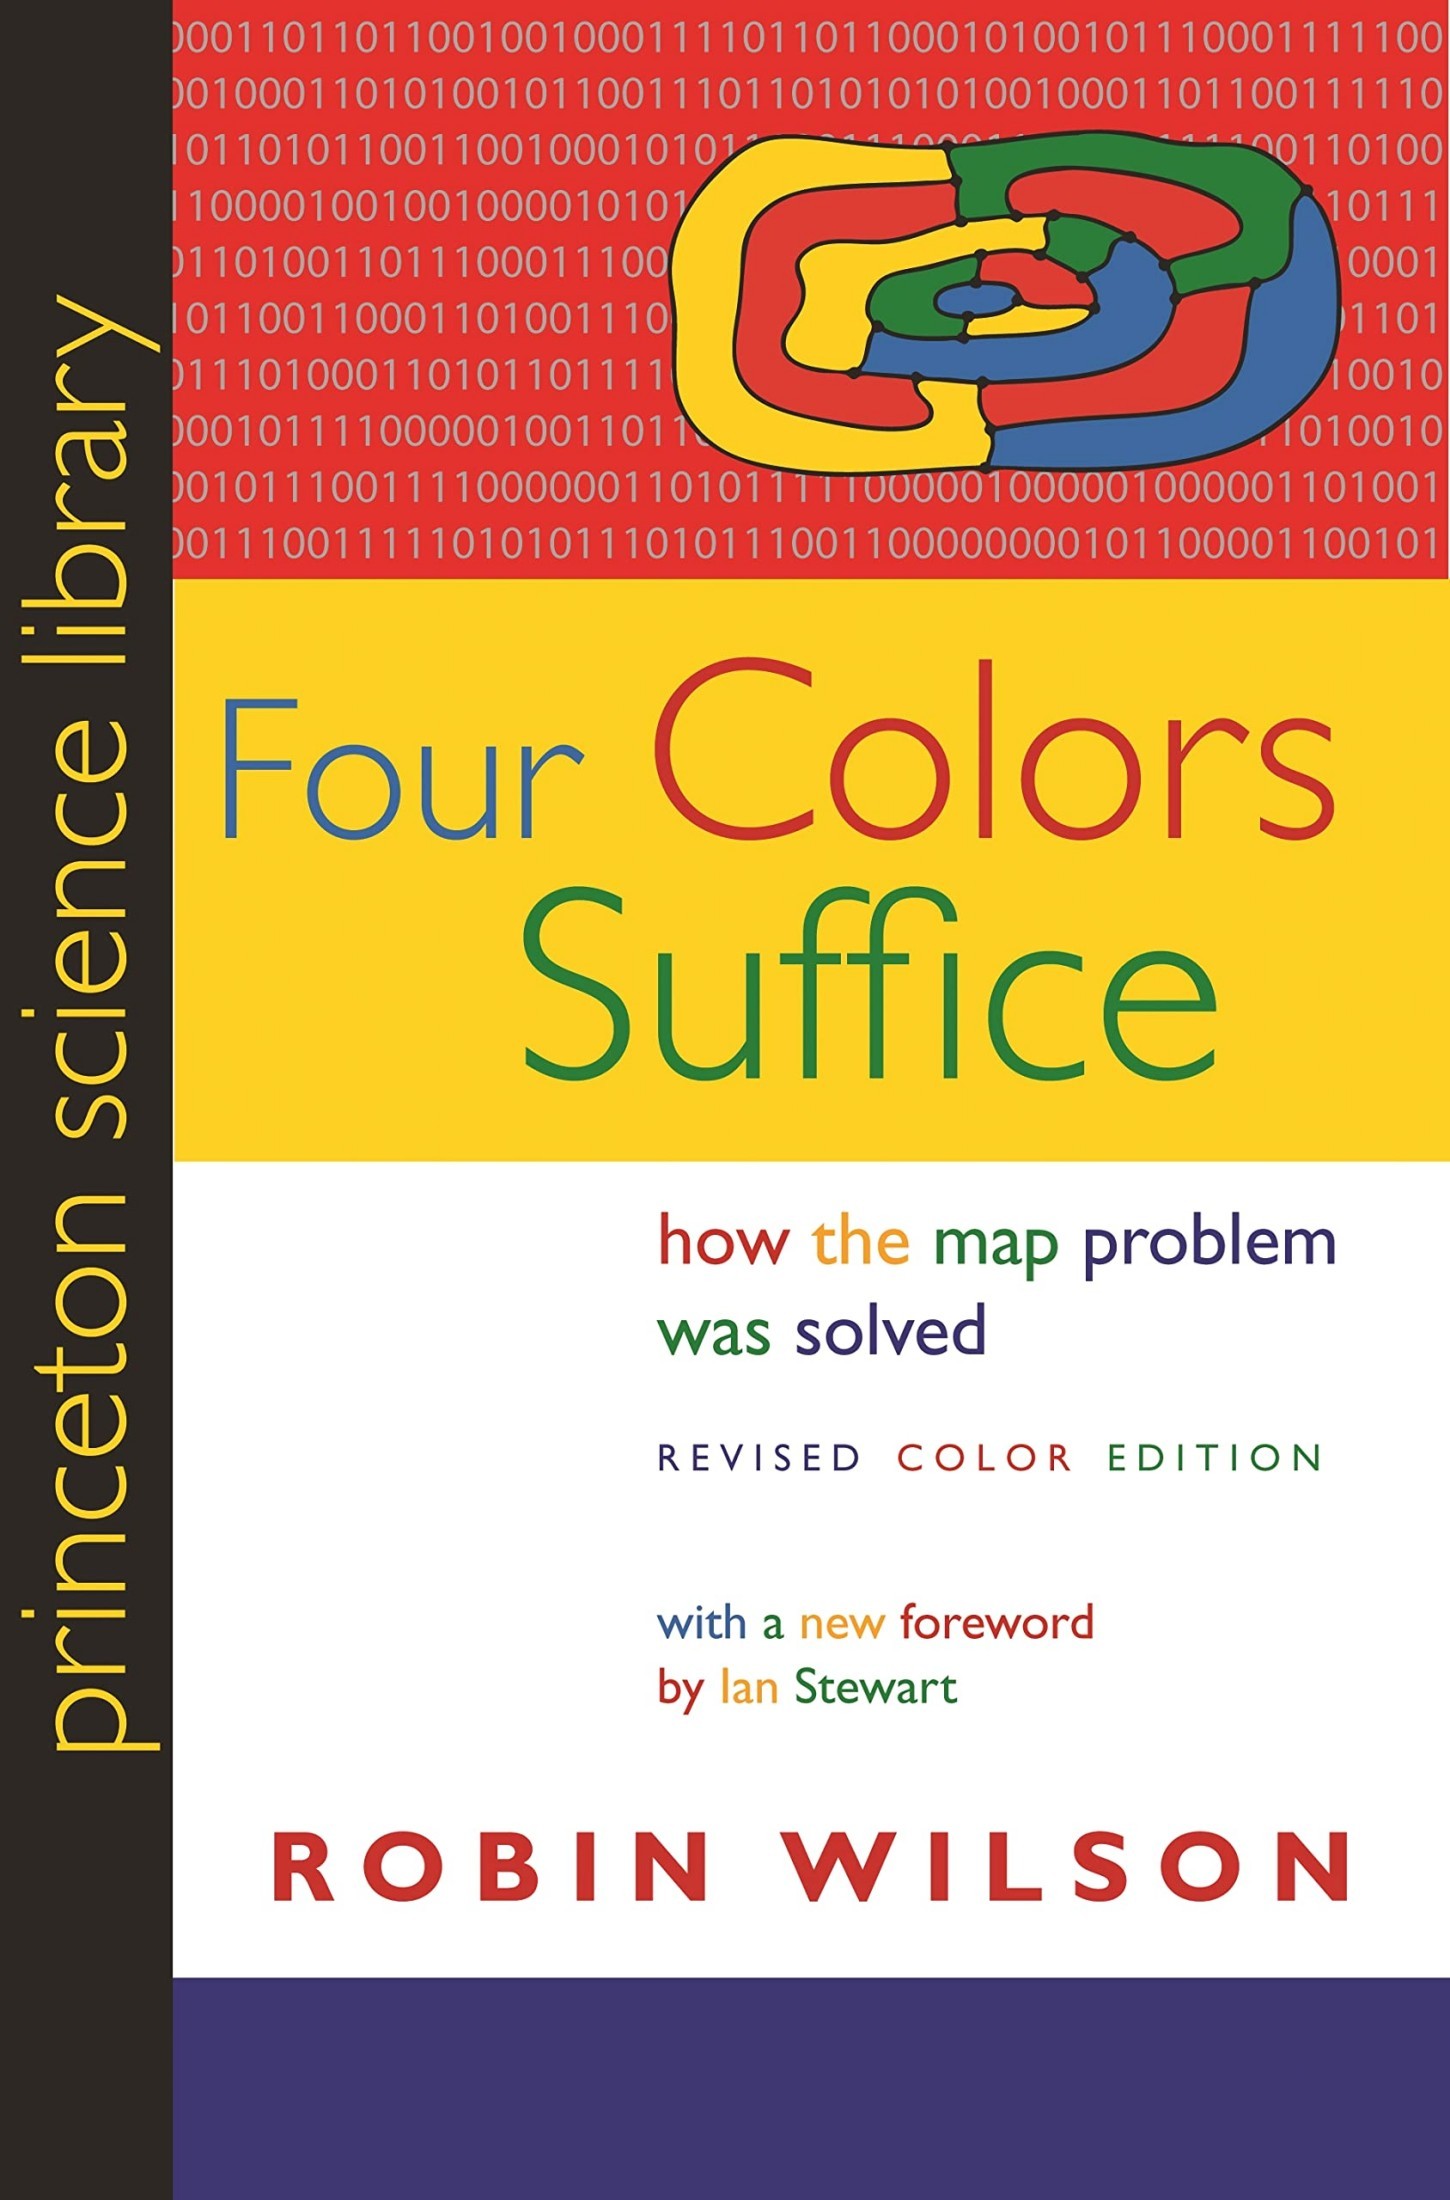 Four Colors Suffice: How the Map Problem Was Solved - Revised Color Edition